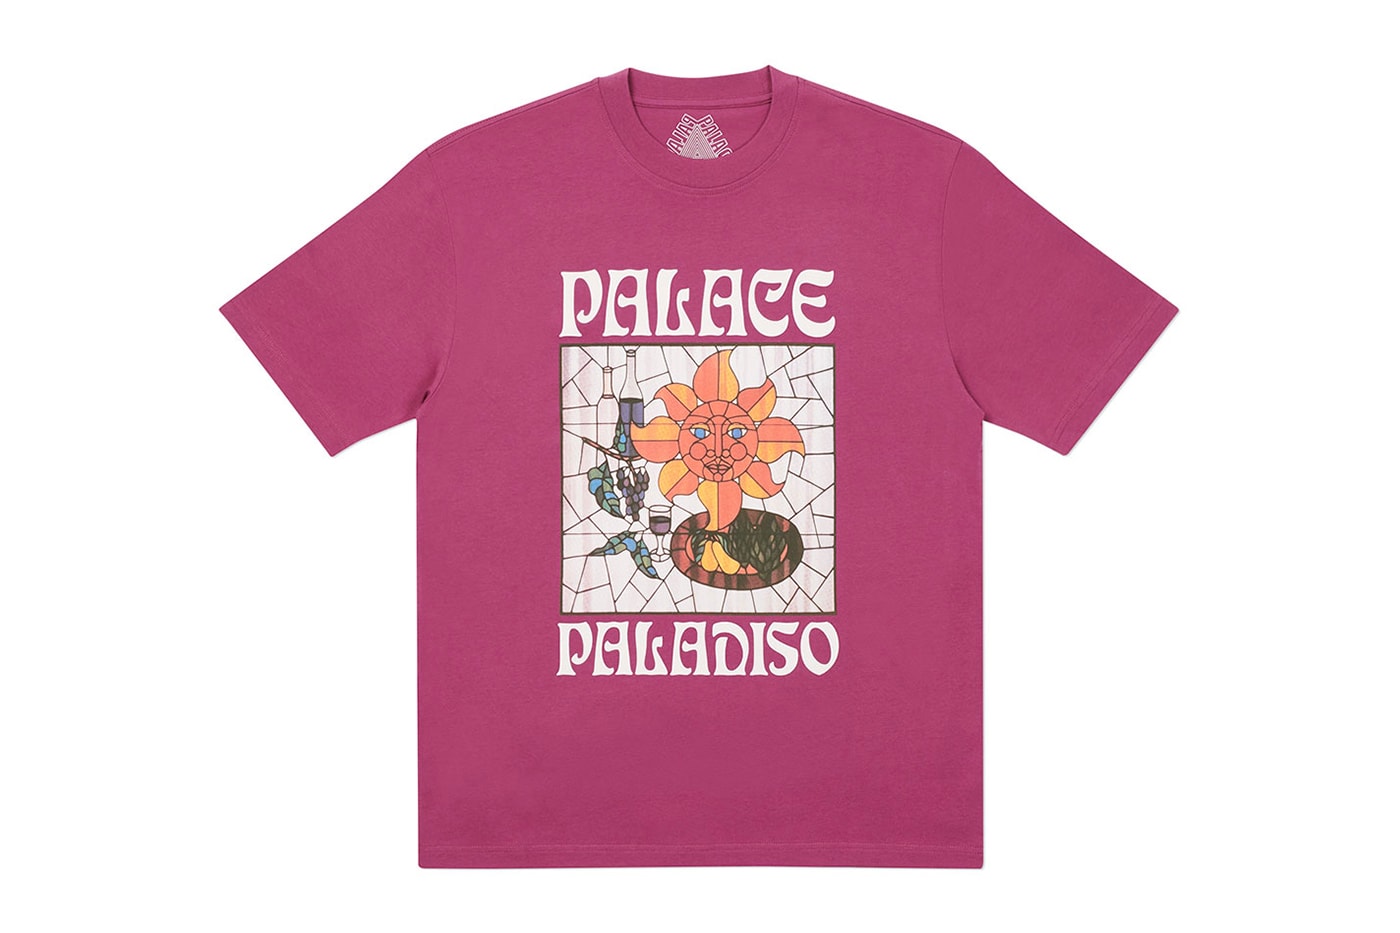 Palace Winter 2020 Tees T Shirts beer twi ferg jersey collection drop info